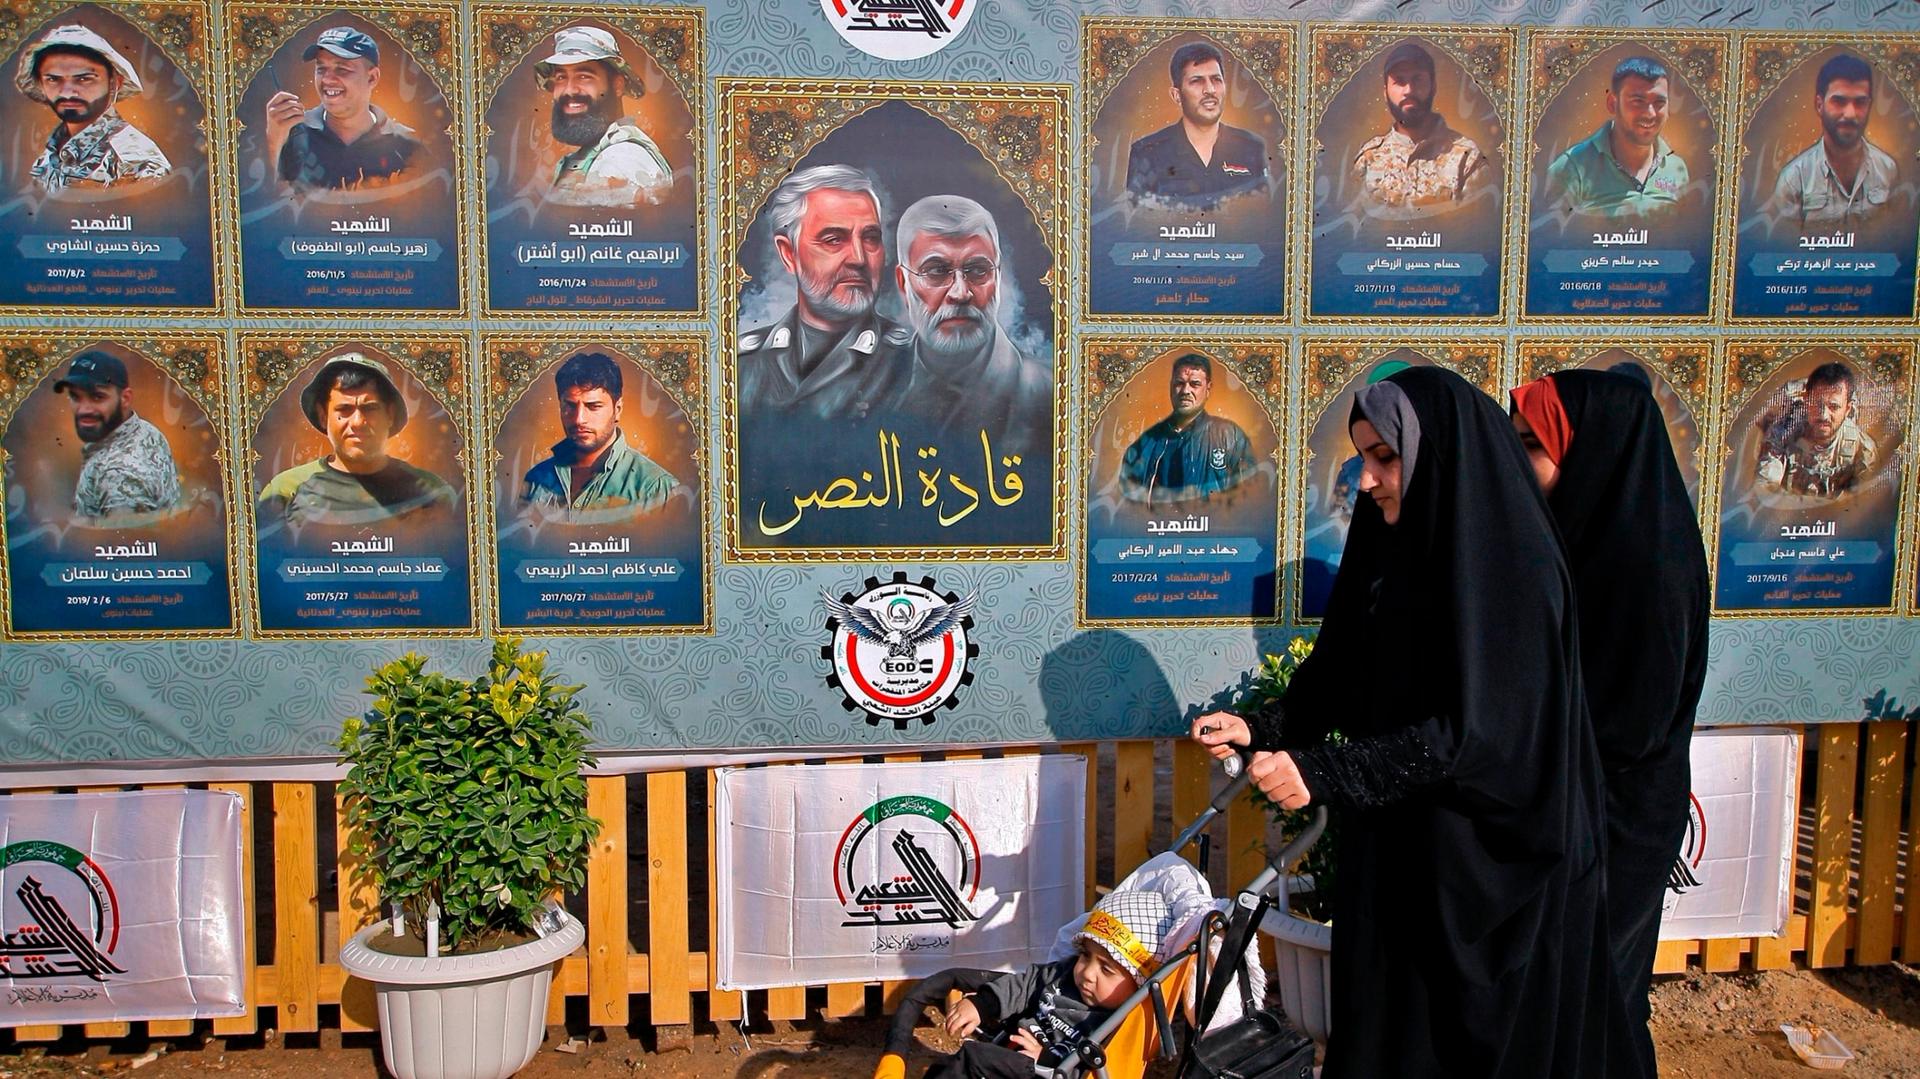 People pass by posters of Gen. Qassem Soleimani along with several other illustrated portraits alongside. 